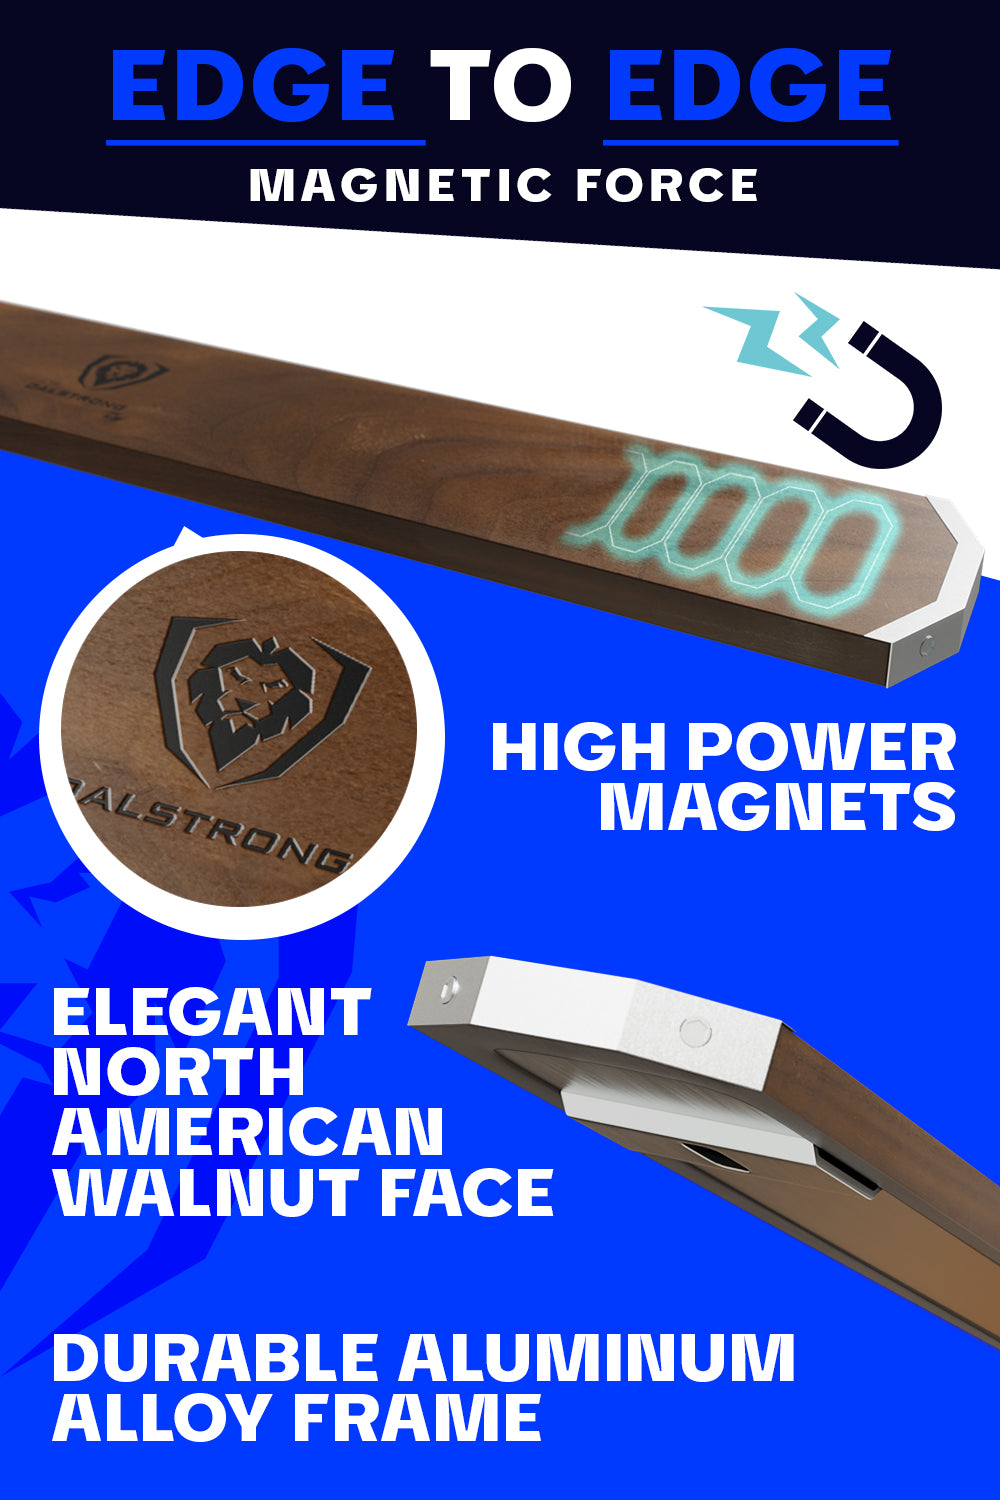 Dalstrong magnetic bar walnut wall knife holder featuring it's durable aluminum alloy frame.